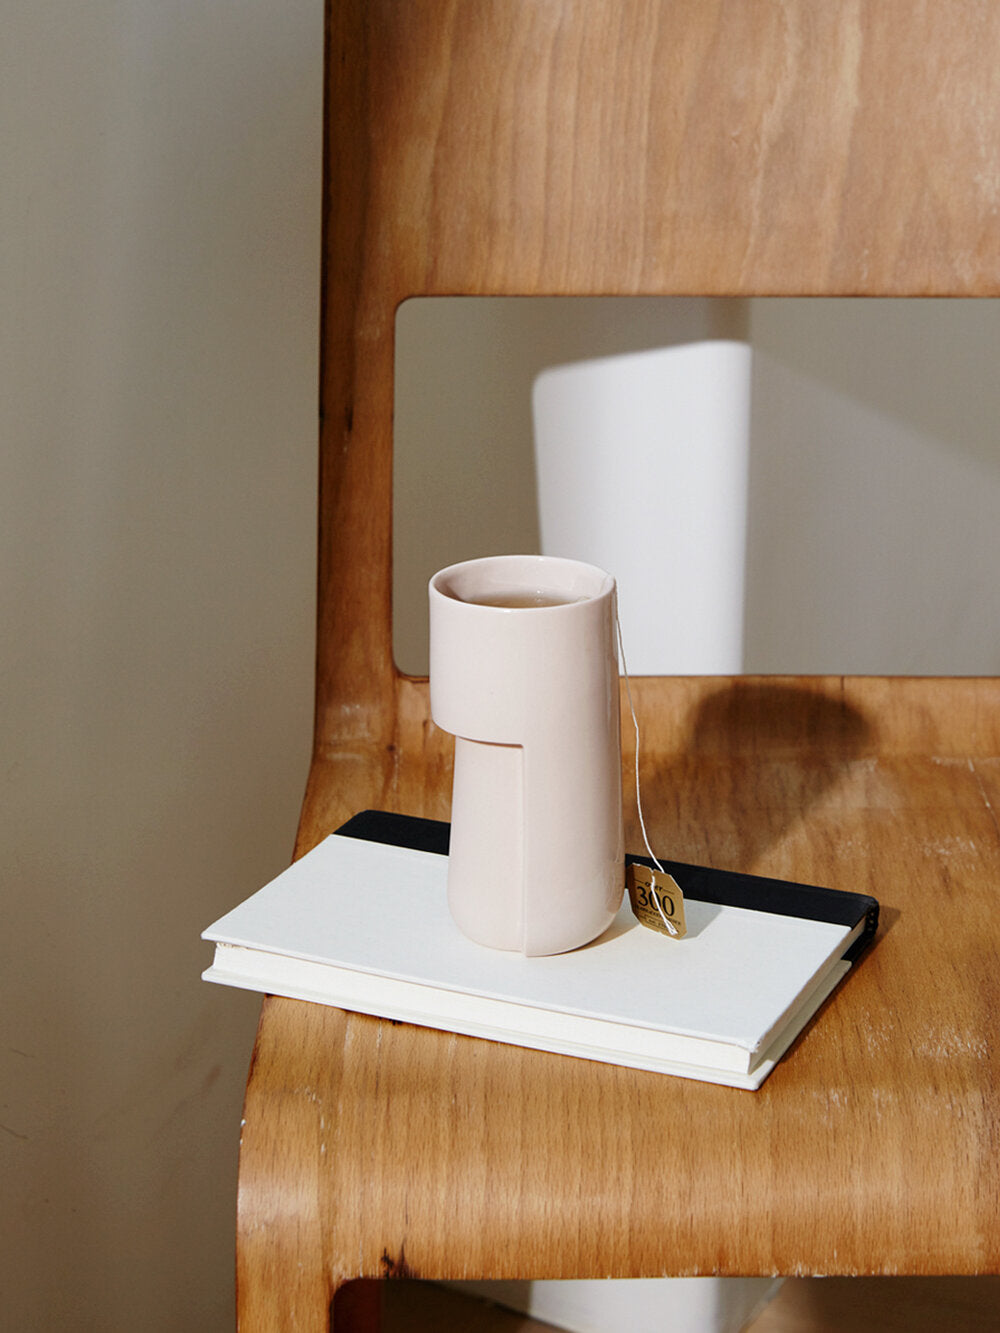 Hiball ceramic mug in Blush pink color containing tea sits atop a wooden chair 